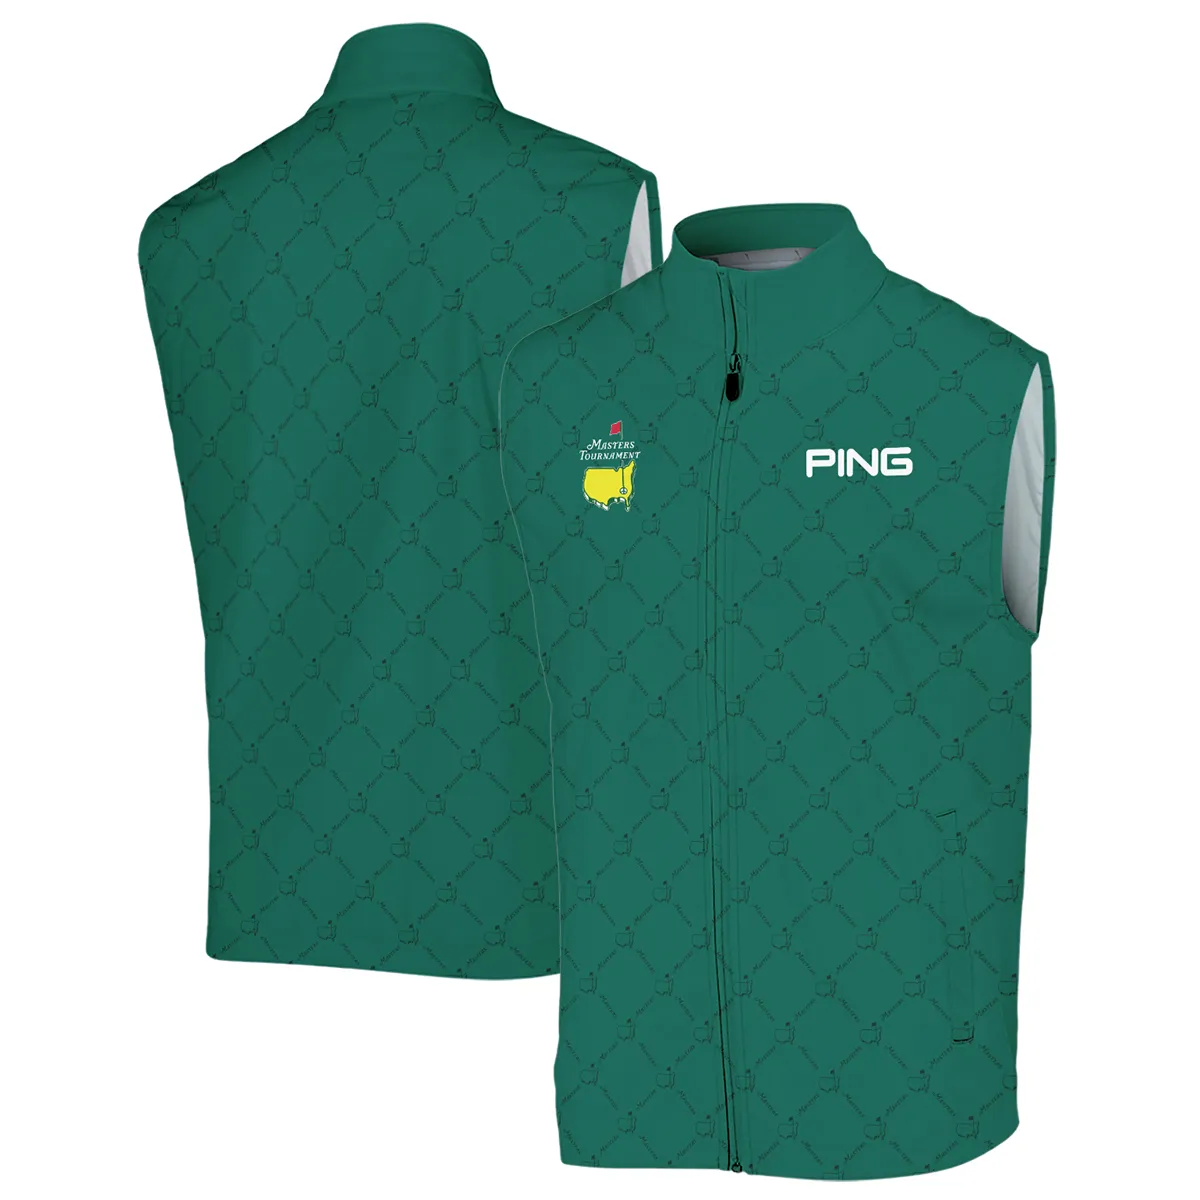 Golf Sport Pattern Color Green Mix Black Masters Tournament Ping Sleeveless Jacket Style Classic